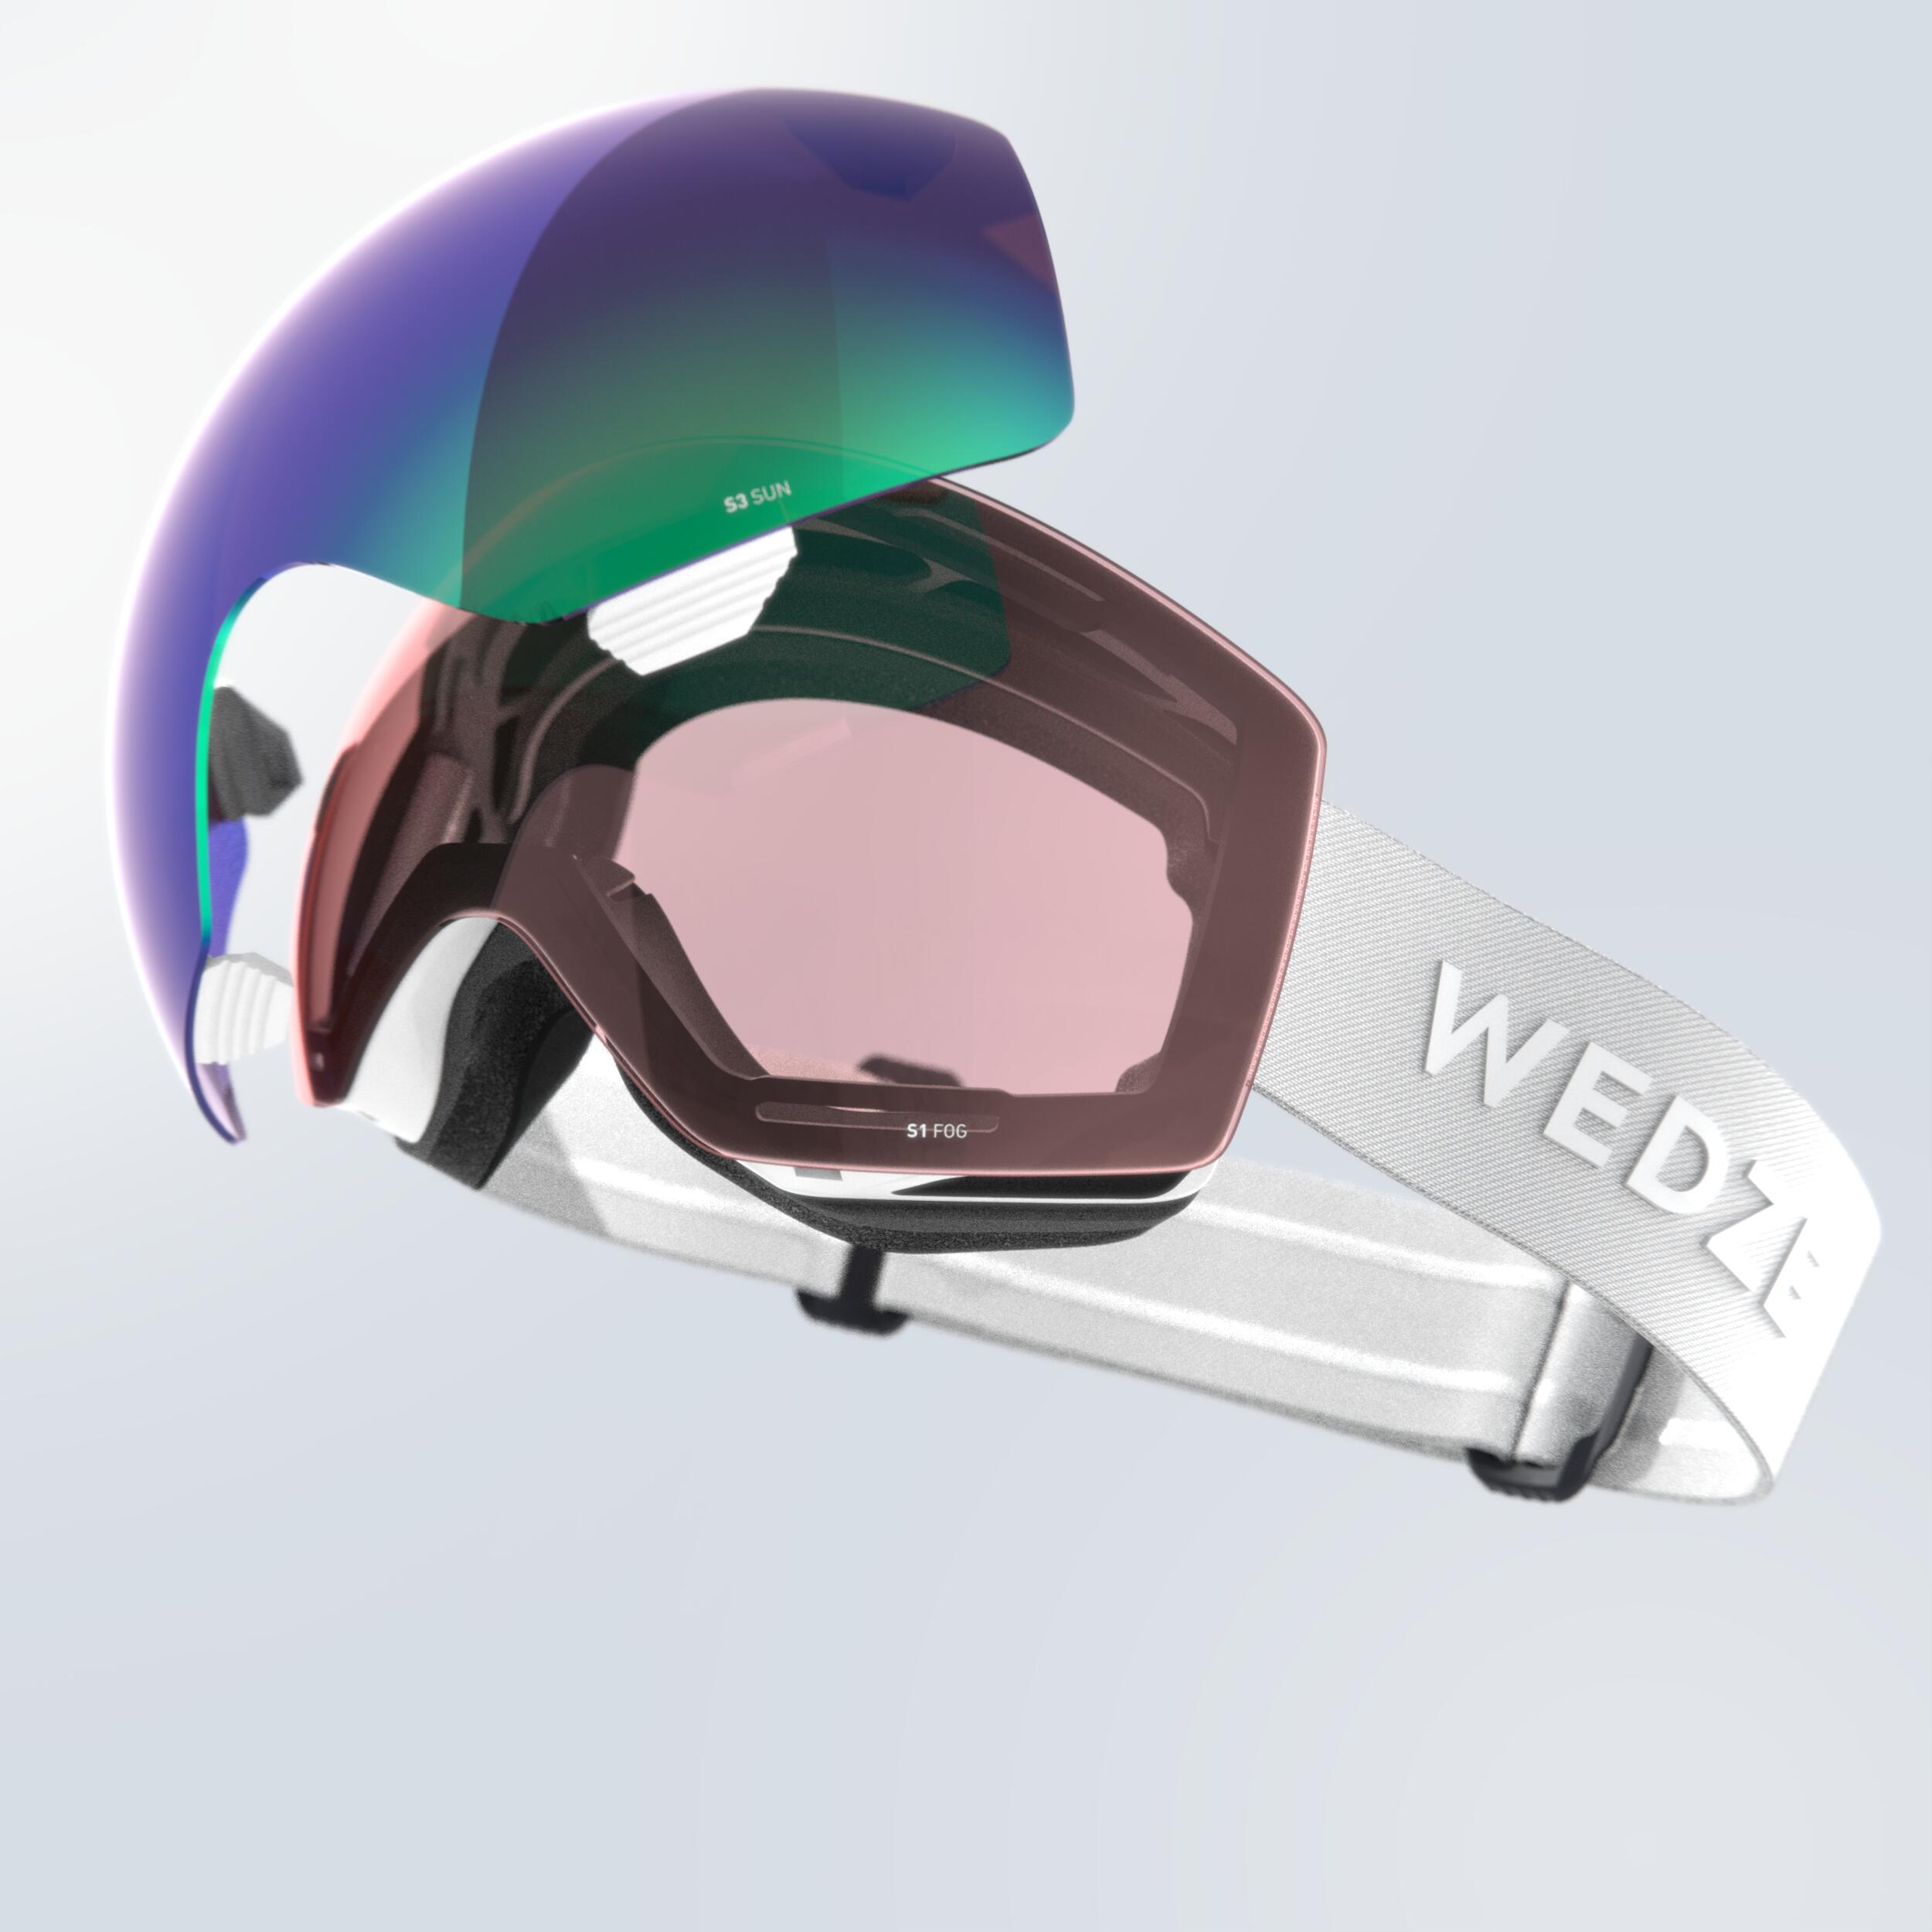 Snow Goggles from goodr | SNOW Gs — goodr sunglasses